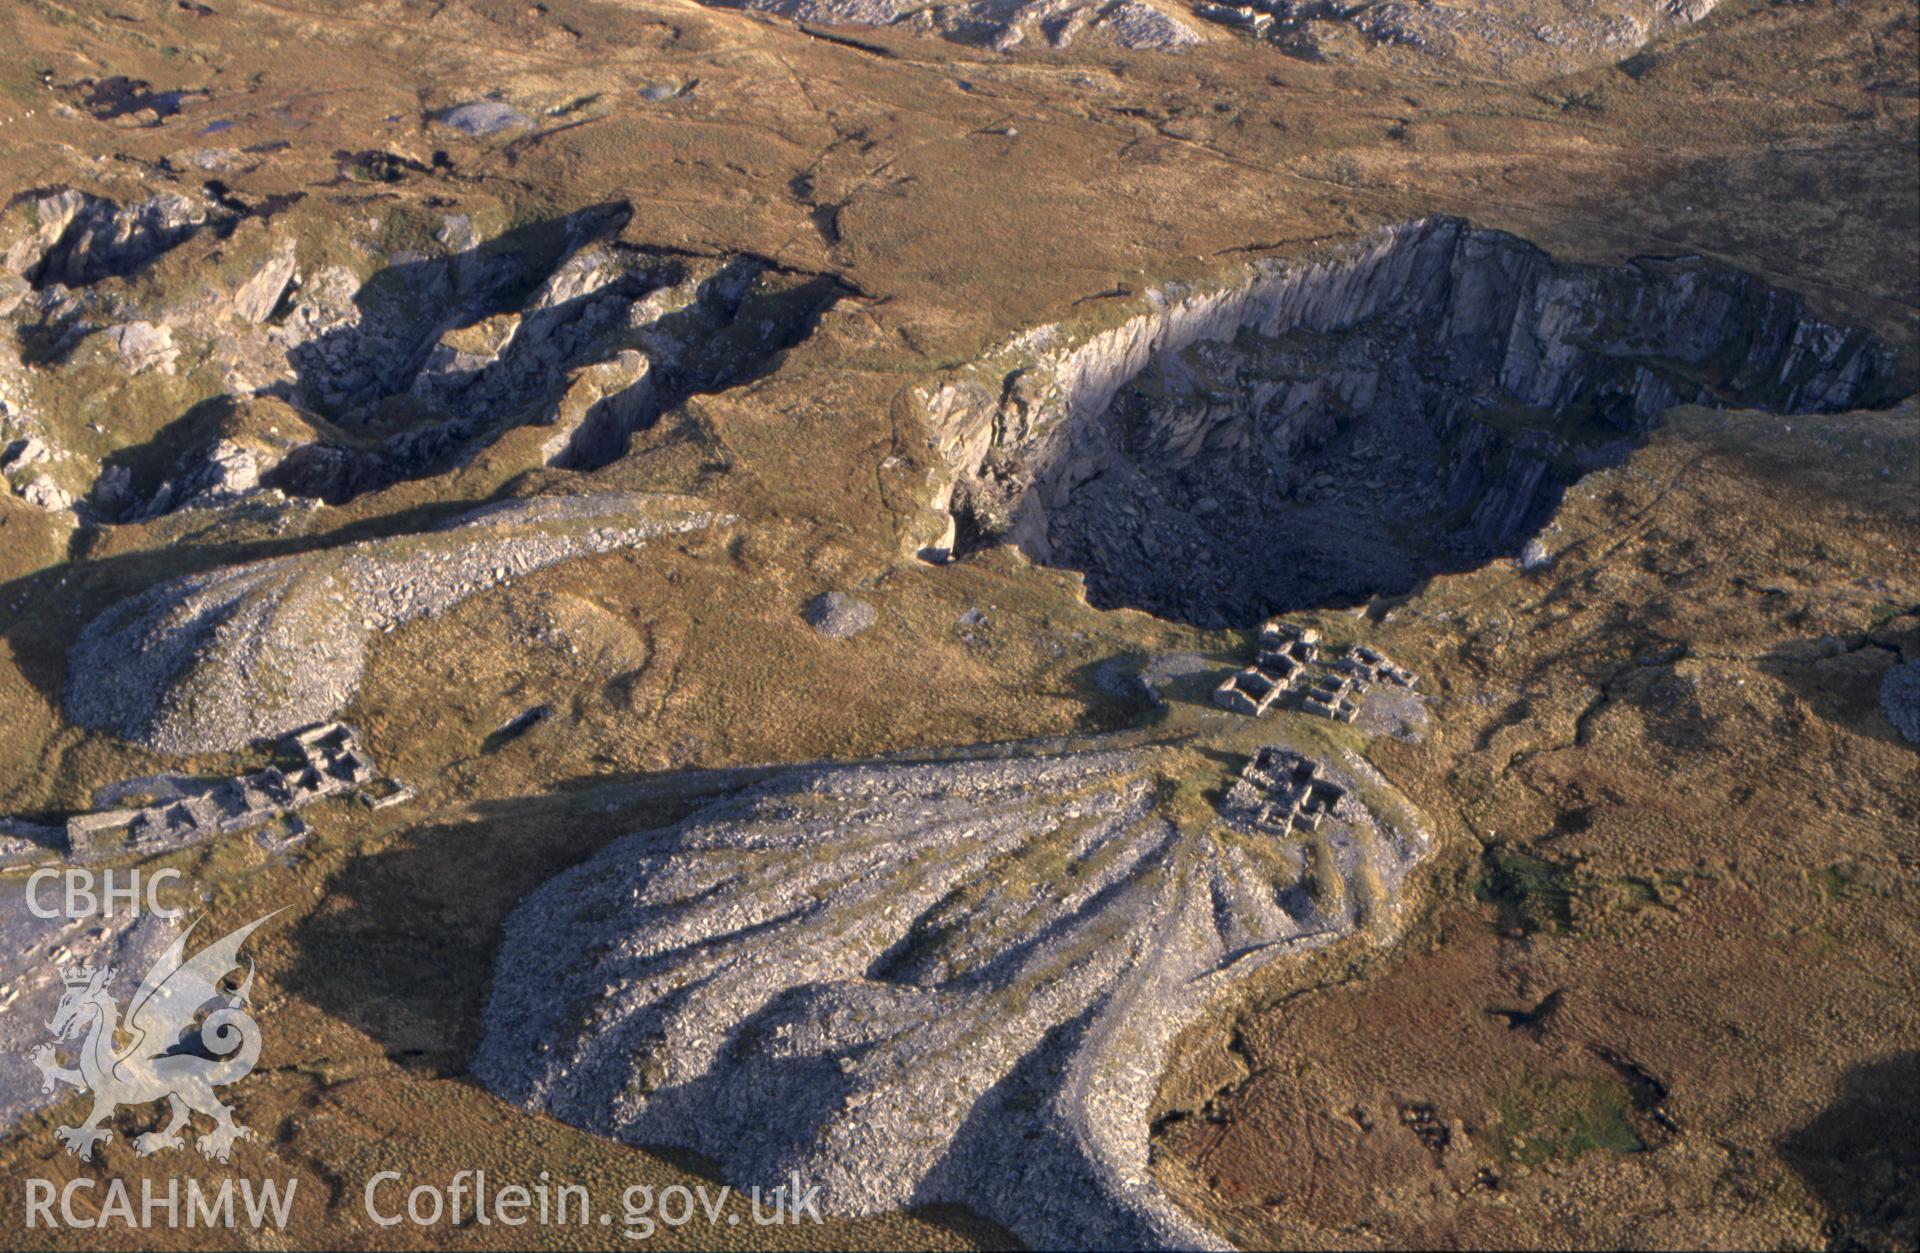 Slide of RCAHMW colour oblique aerial photograph of Rhosydd Slate Quarry, taken by C.R. Musson, 9/10/1994.